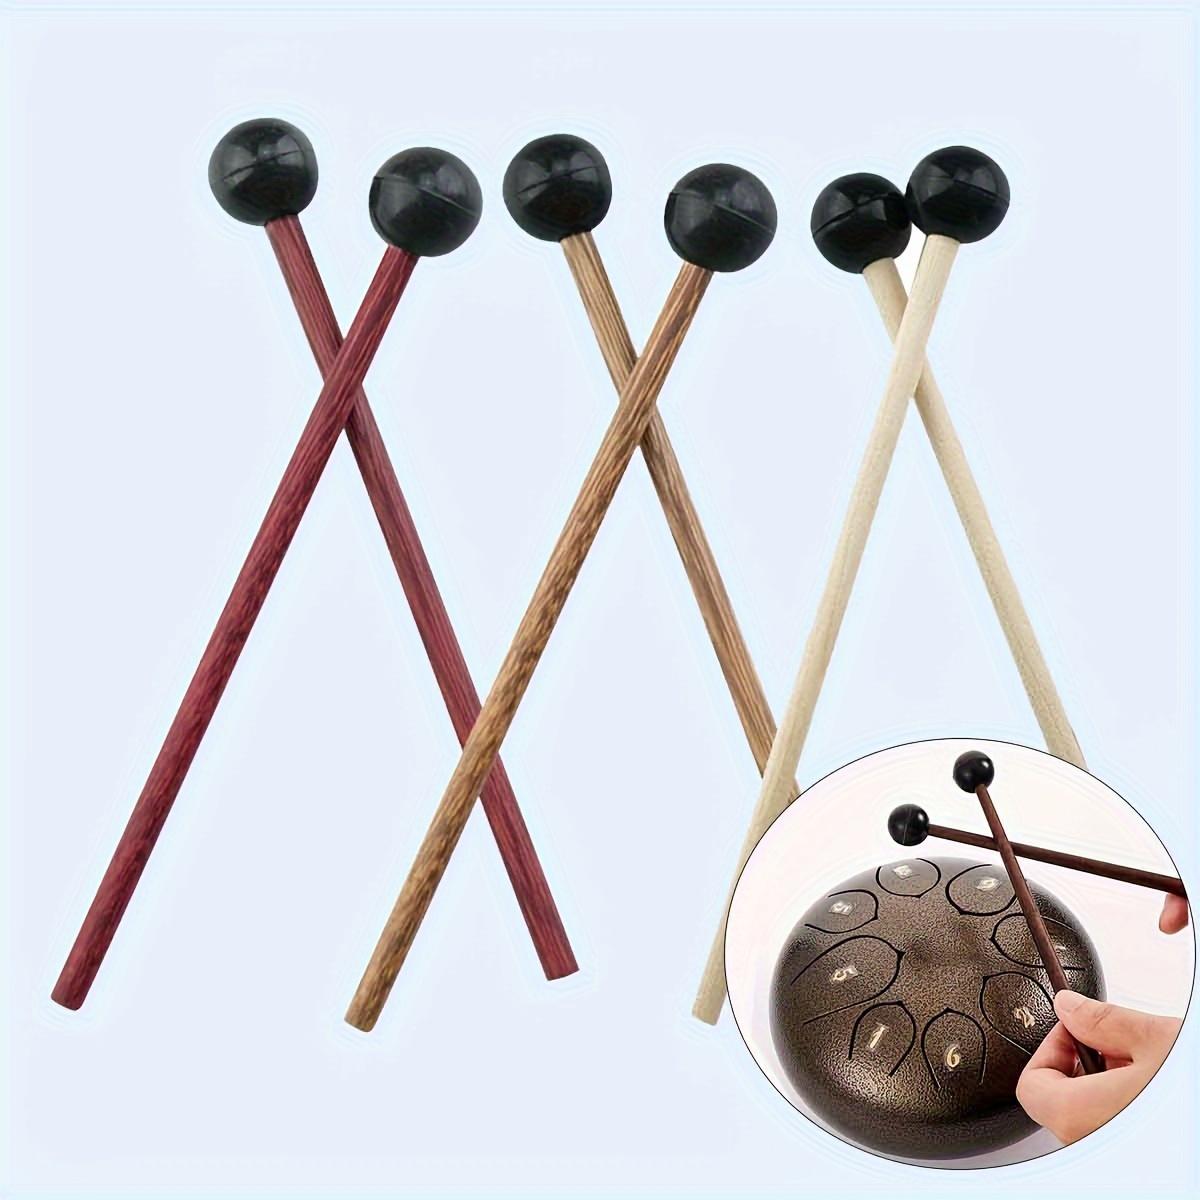 

4pcs Steel Tongue Drum Mallet, Beginner's Rubber Drumsticks 6in/8inch Percussion Instrument Parts For Beginner Drummers And Practitioners